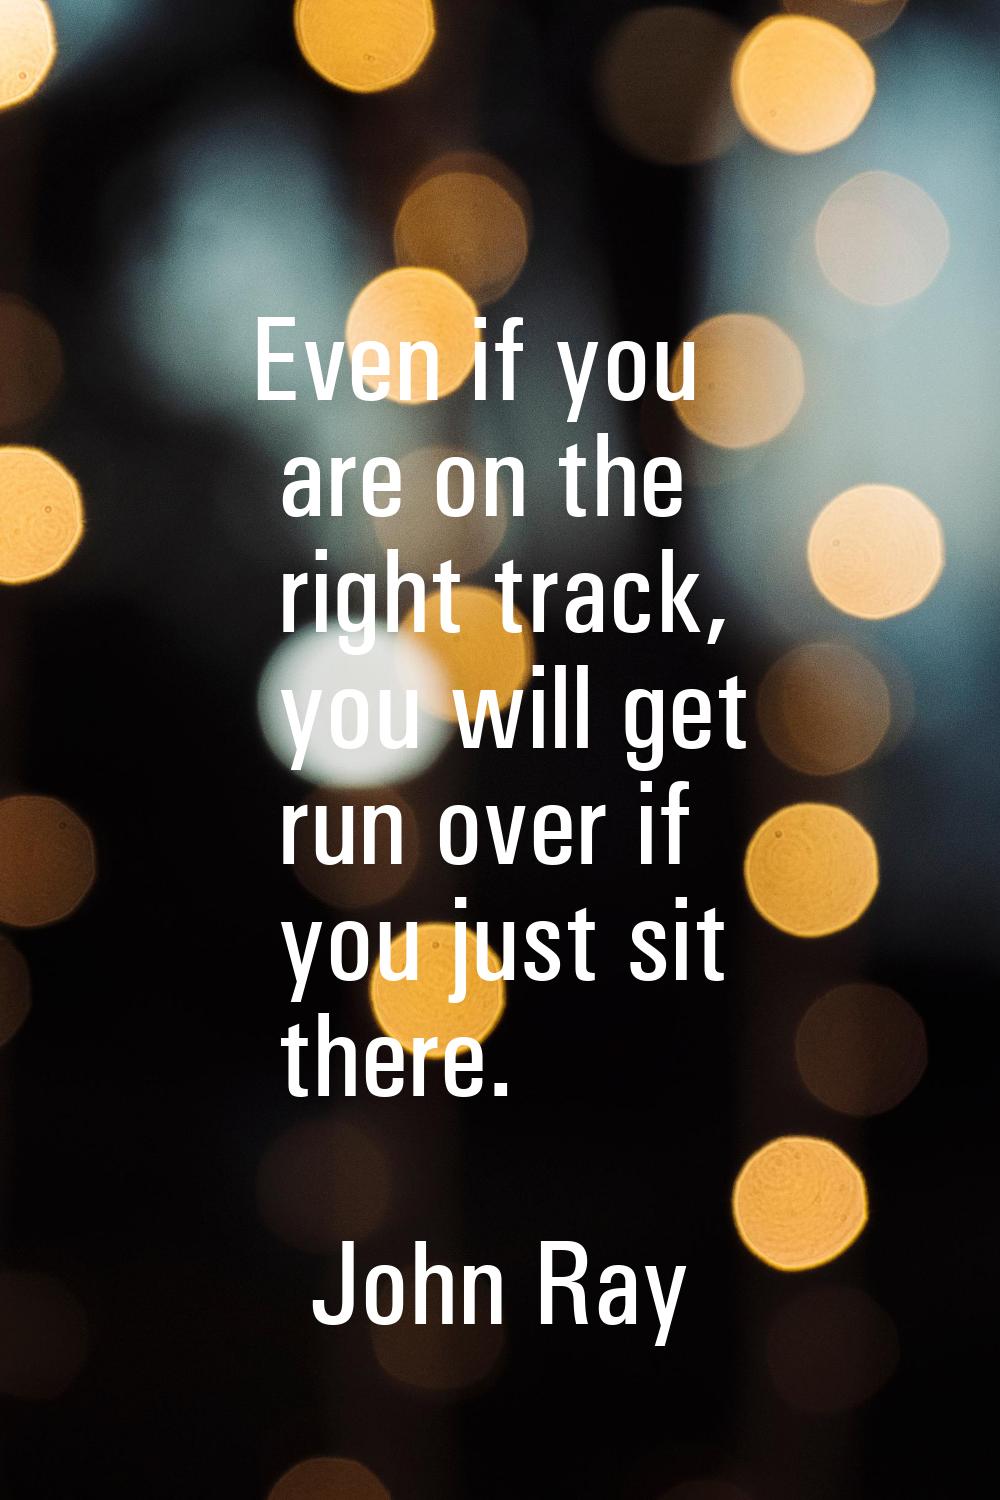 Even if you are on the right track, you will get run over if you just sit there.